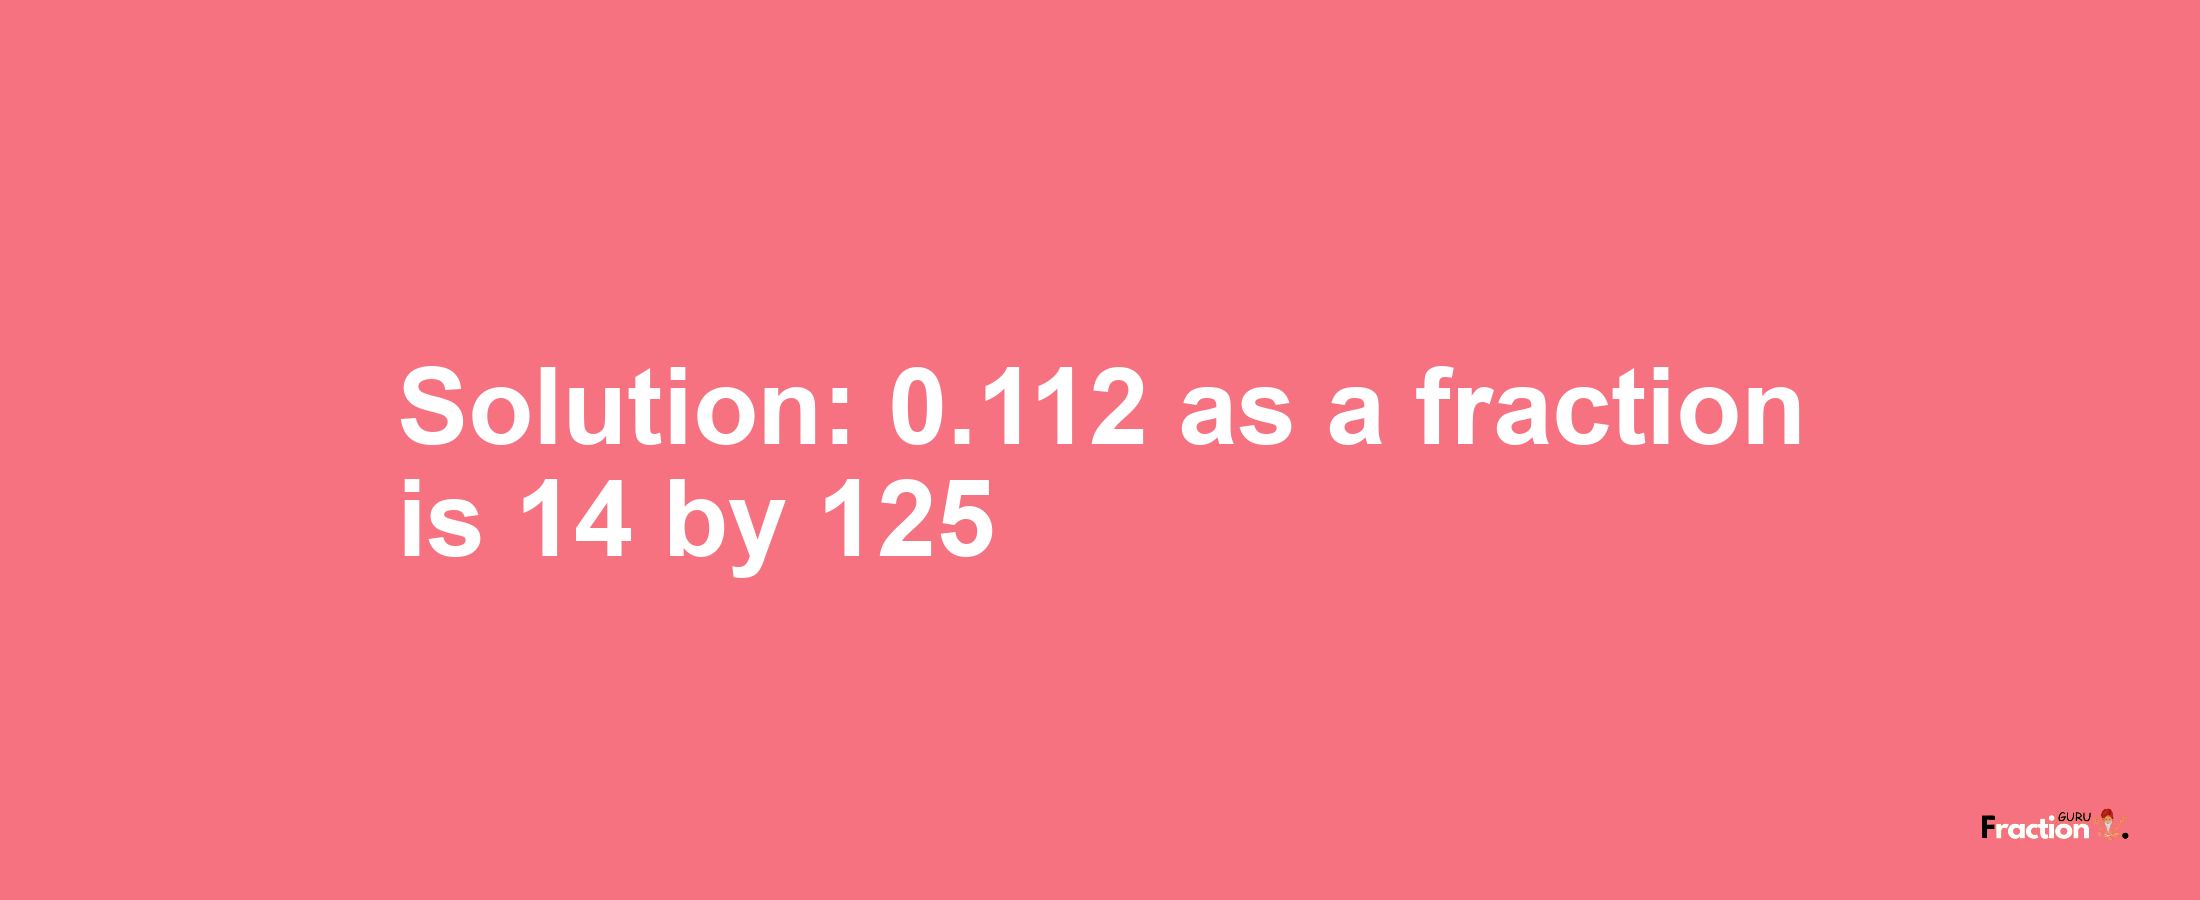 Solution:0.112 as a fraction is 14/125